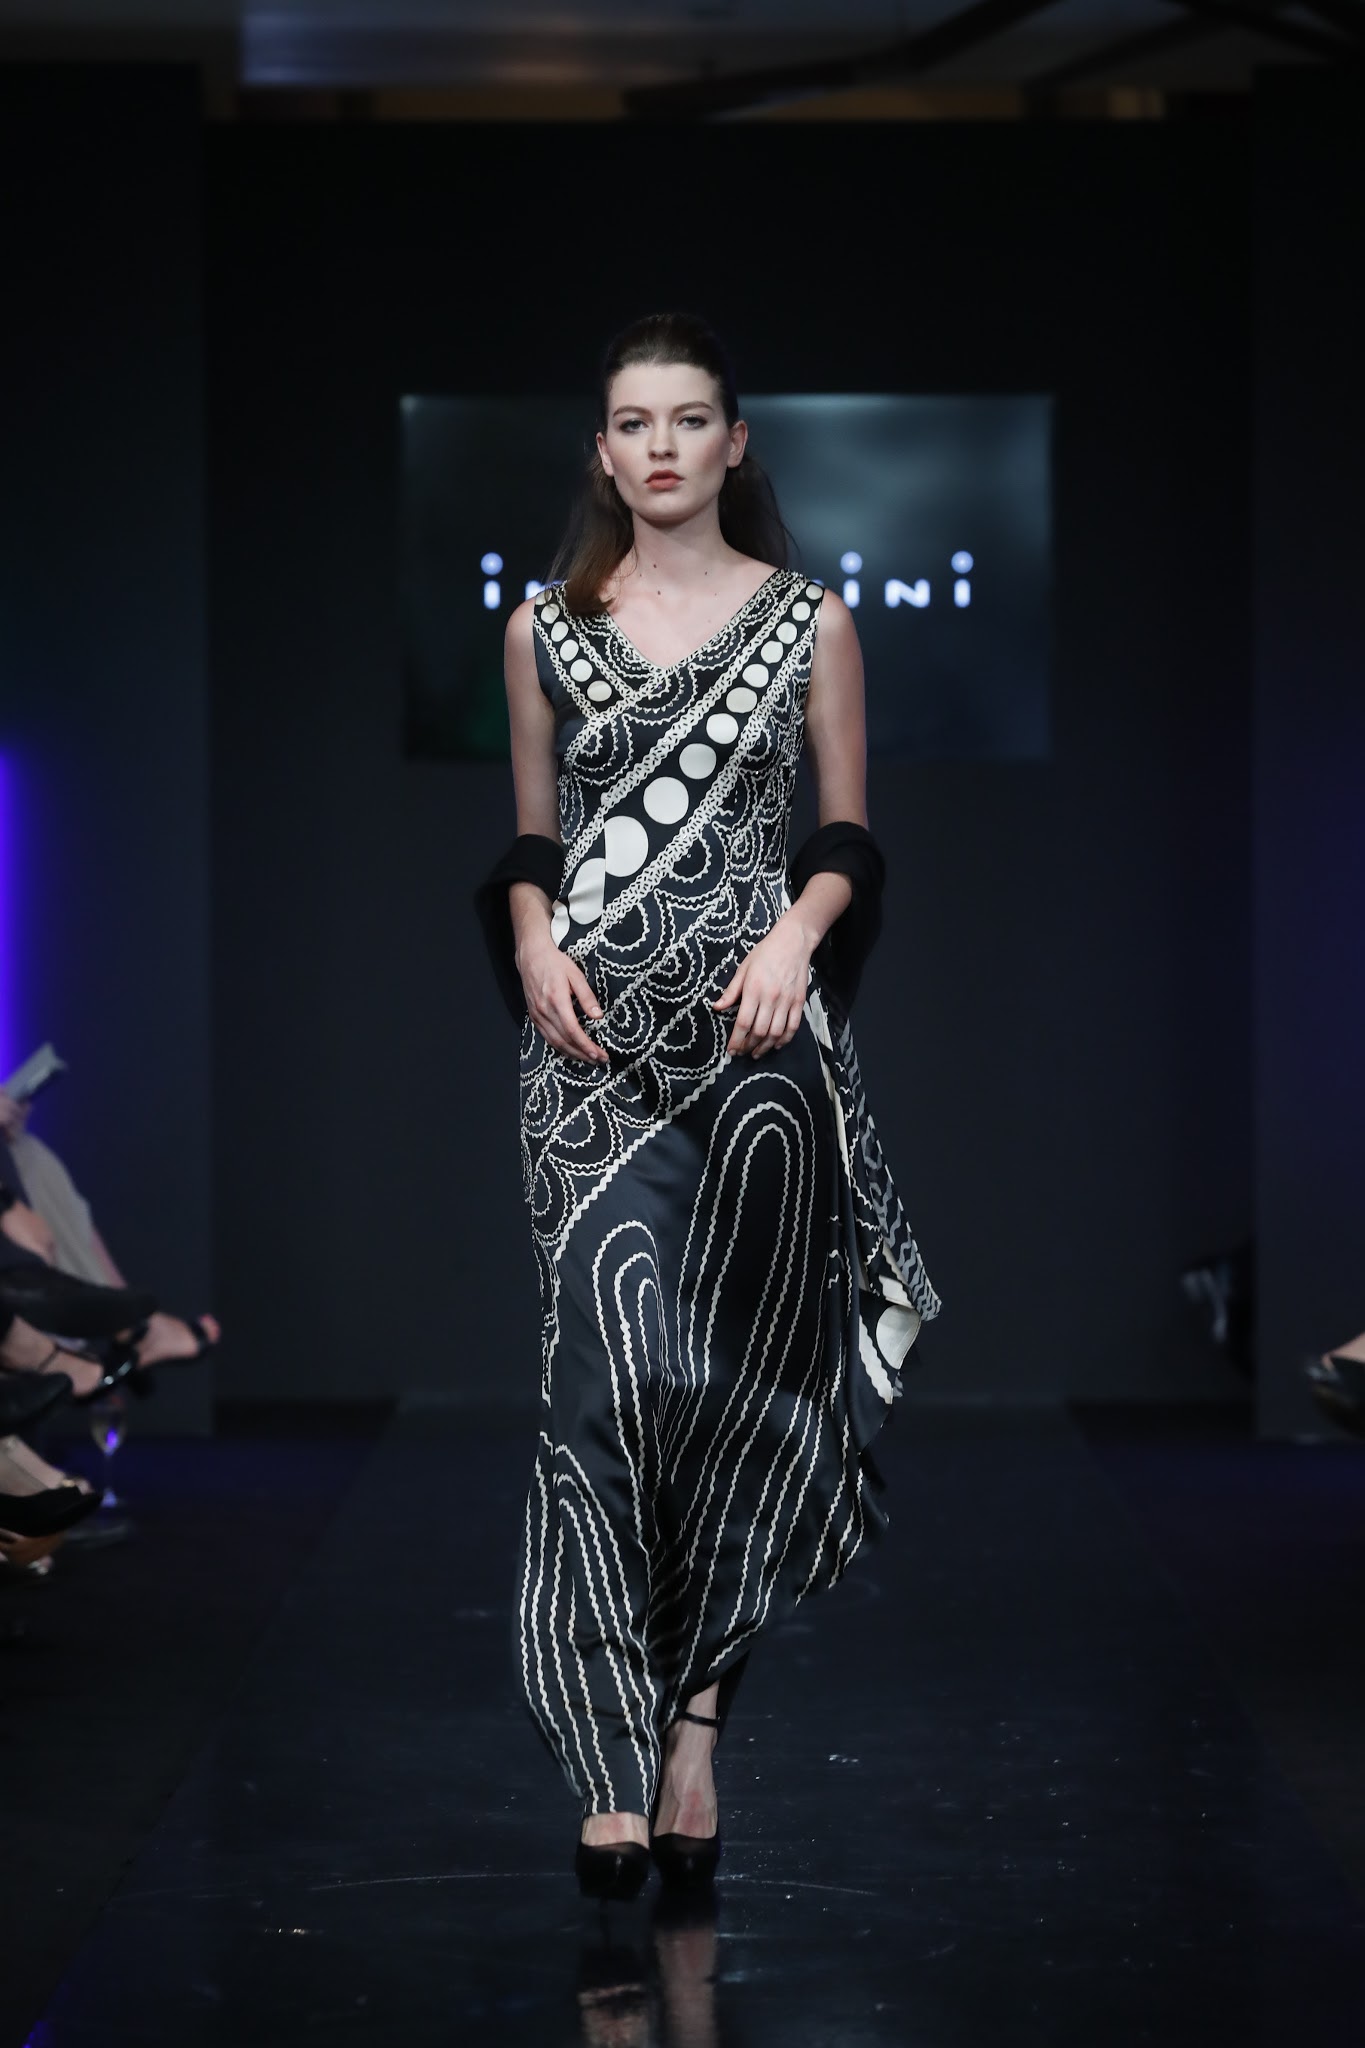 GLITZ AND GLAMOUR TAKE CENTRE STAGE AT STARHILL GALLERY FASHION WEEK SPRING/SUMMER 2017